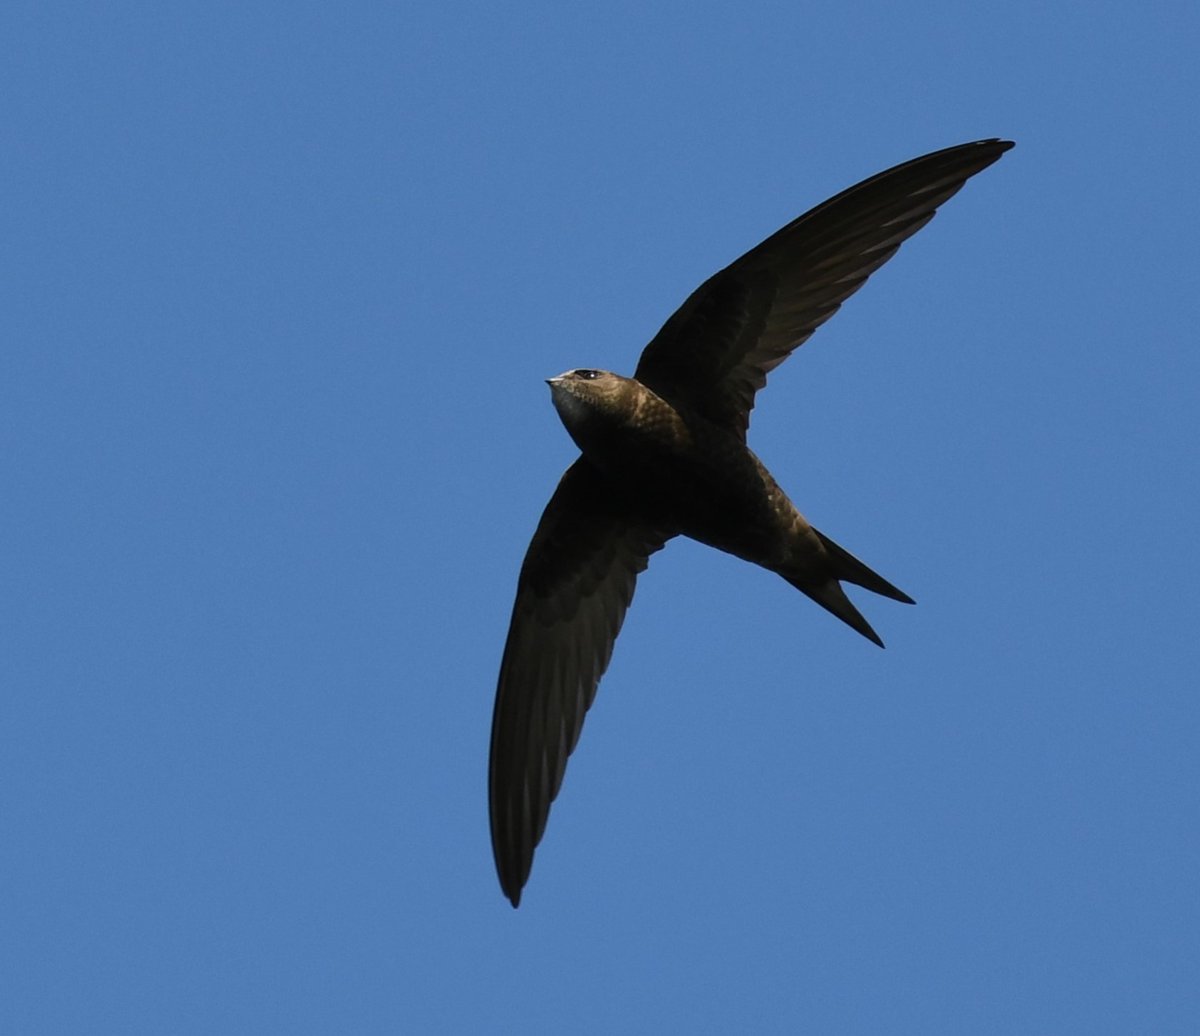 Great to see the Swifts back in the UK! This being one of a group of 40+ at Staines yesterday. 60% population reduction 1995-2020 and only about 60k pairs left of these aerial masters. @_BTO #CommonSwift #Birding #BirdMigration